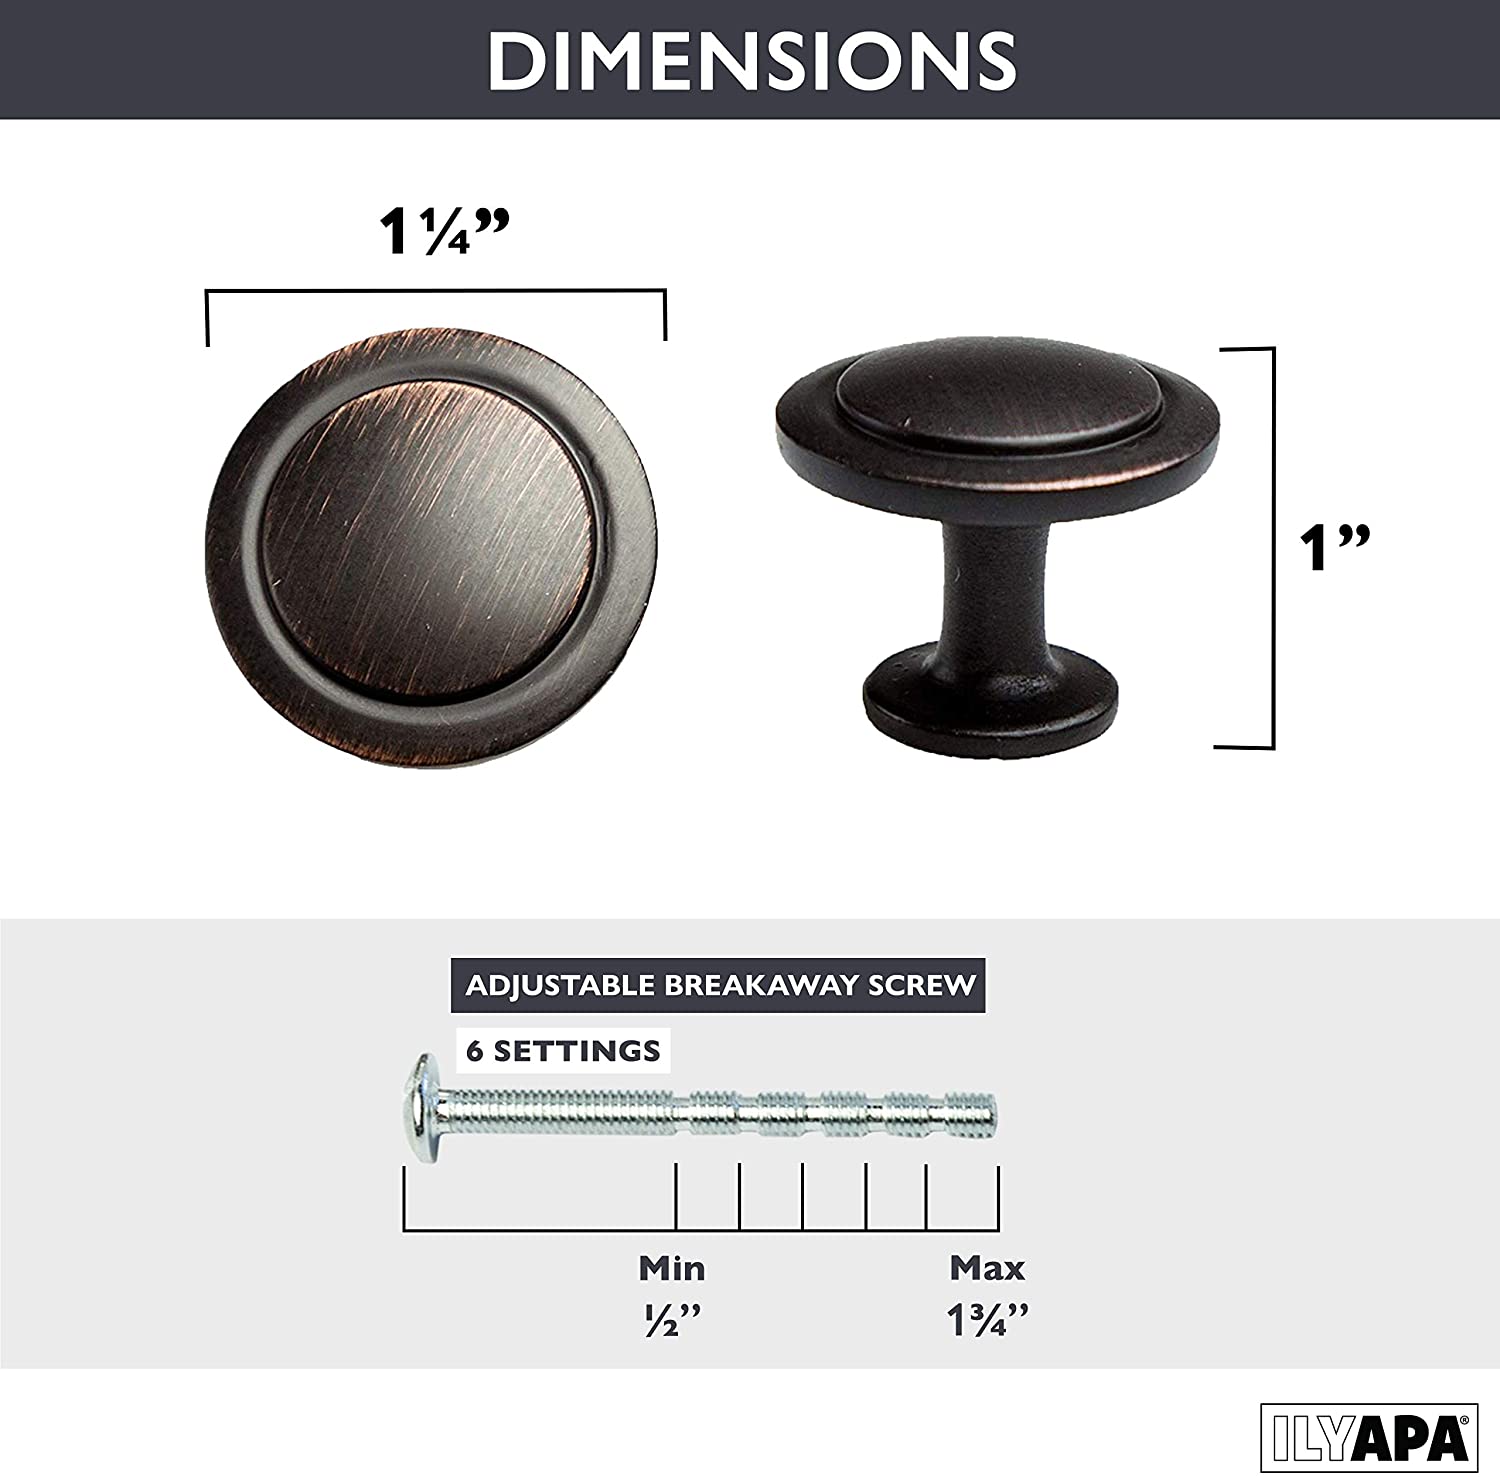 Oil Rubbed Bronze Kitchen Cabinet Knobs - 1 1/4 Inch Round Drawer Handles - 10 Pack of Kitchen Cabinet Hardware - image 5 of 8